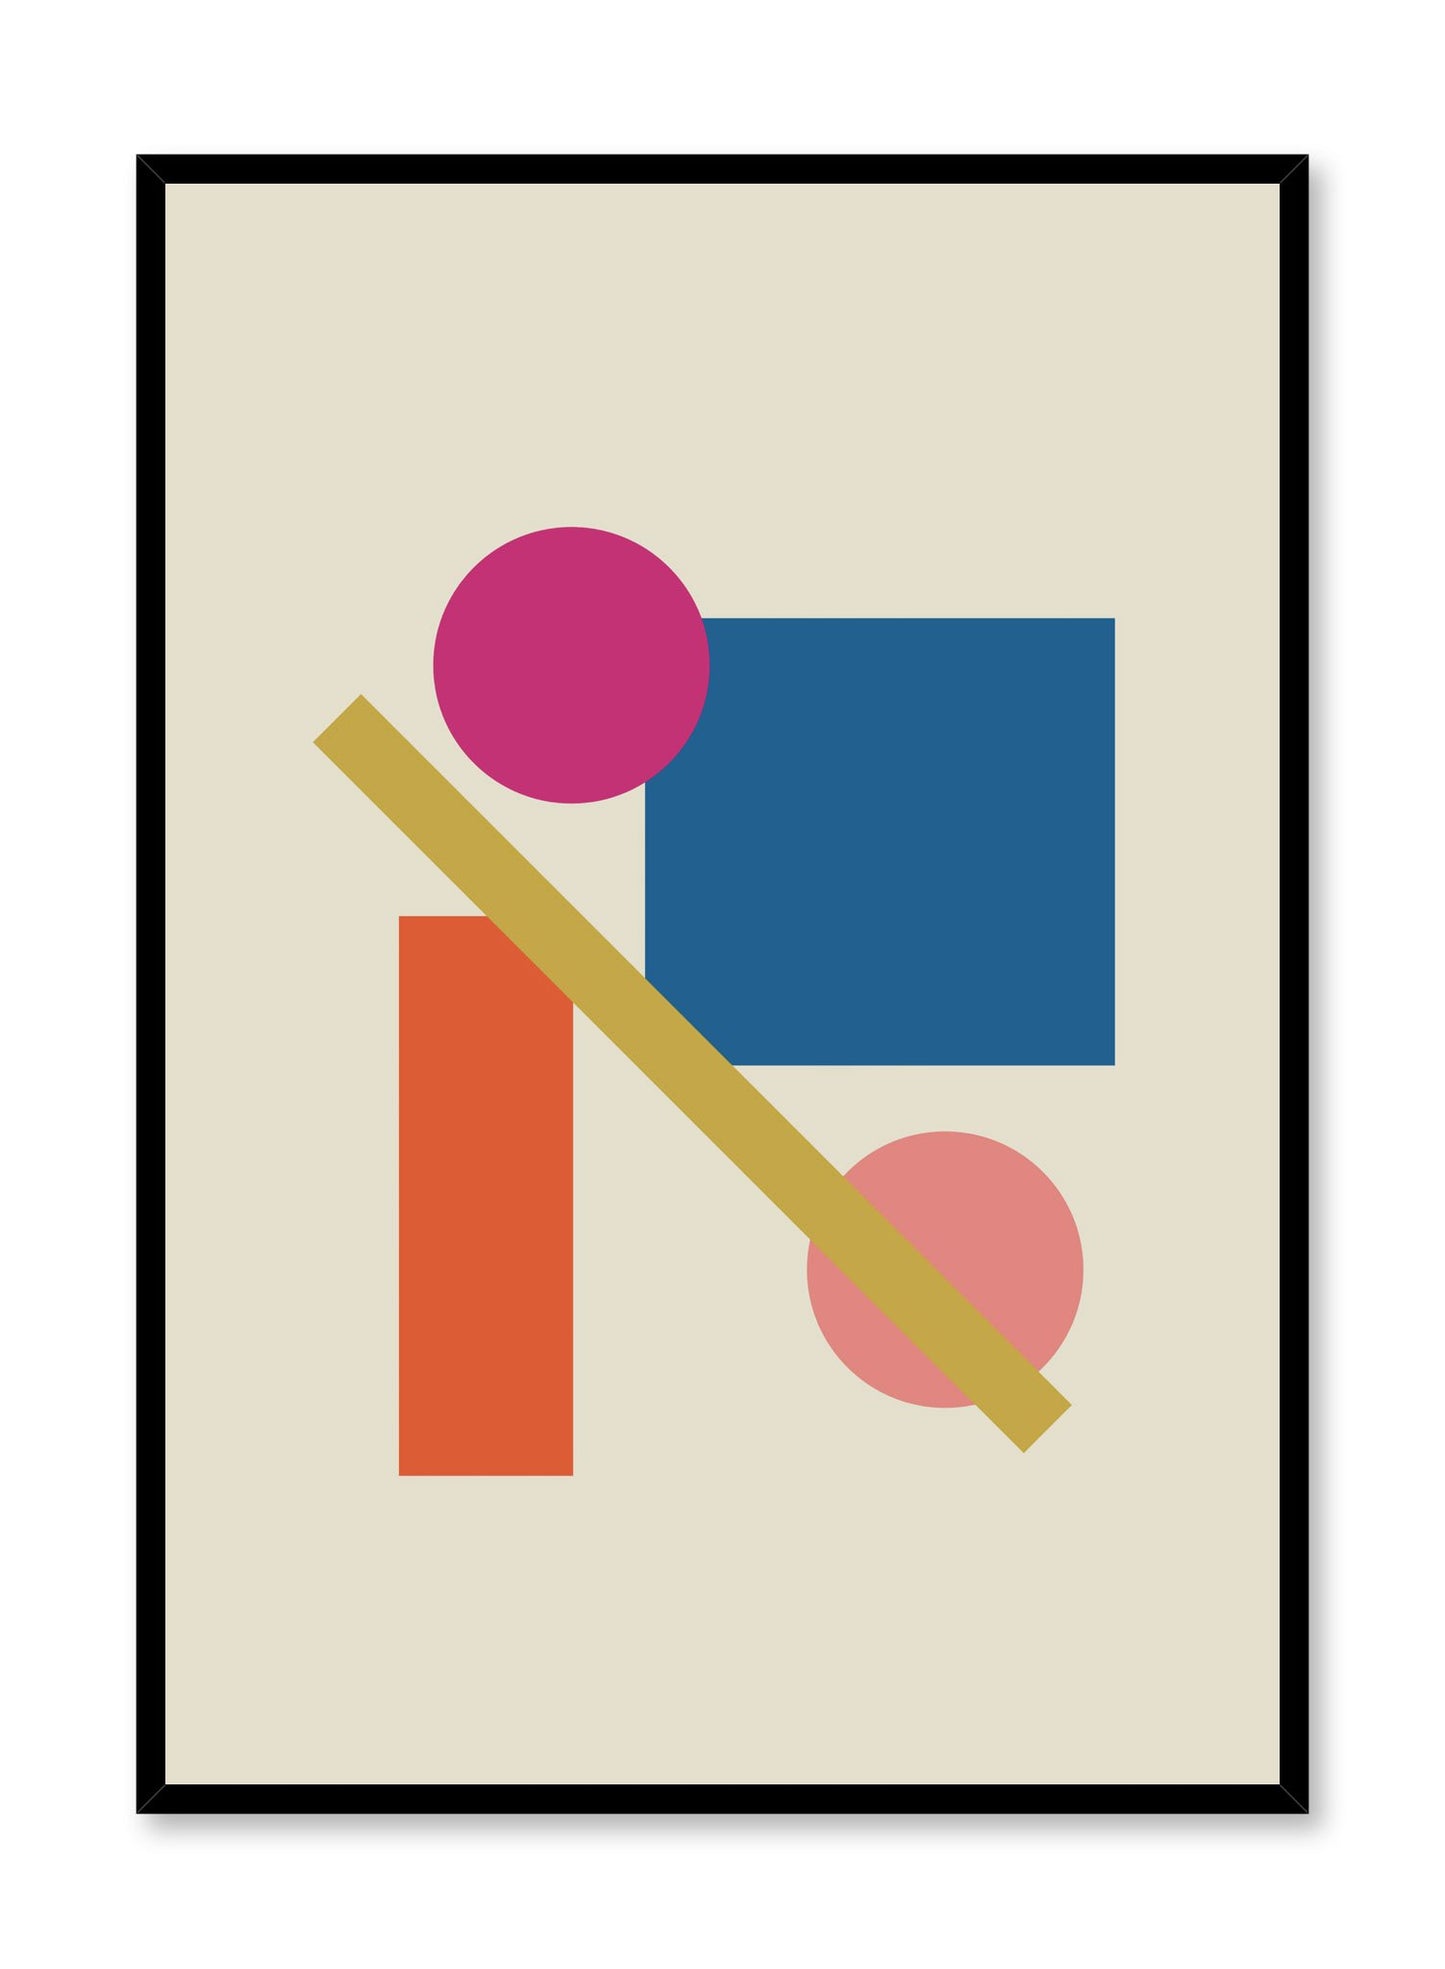 Modern minimalist poster by Opposite Wall with abstract design of Ladder by Toffie Affichiste